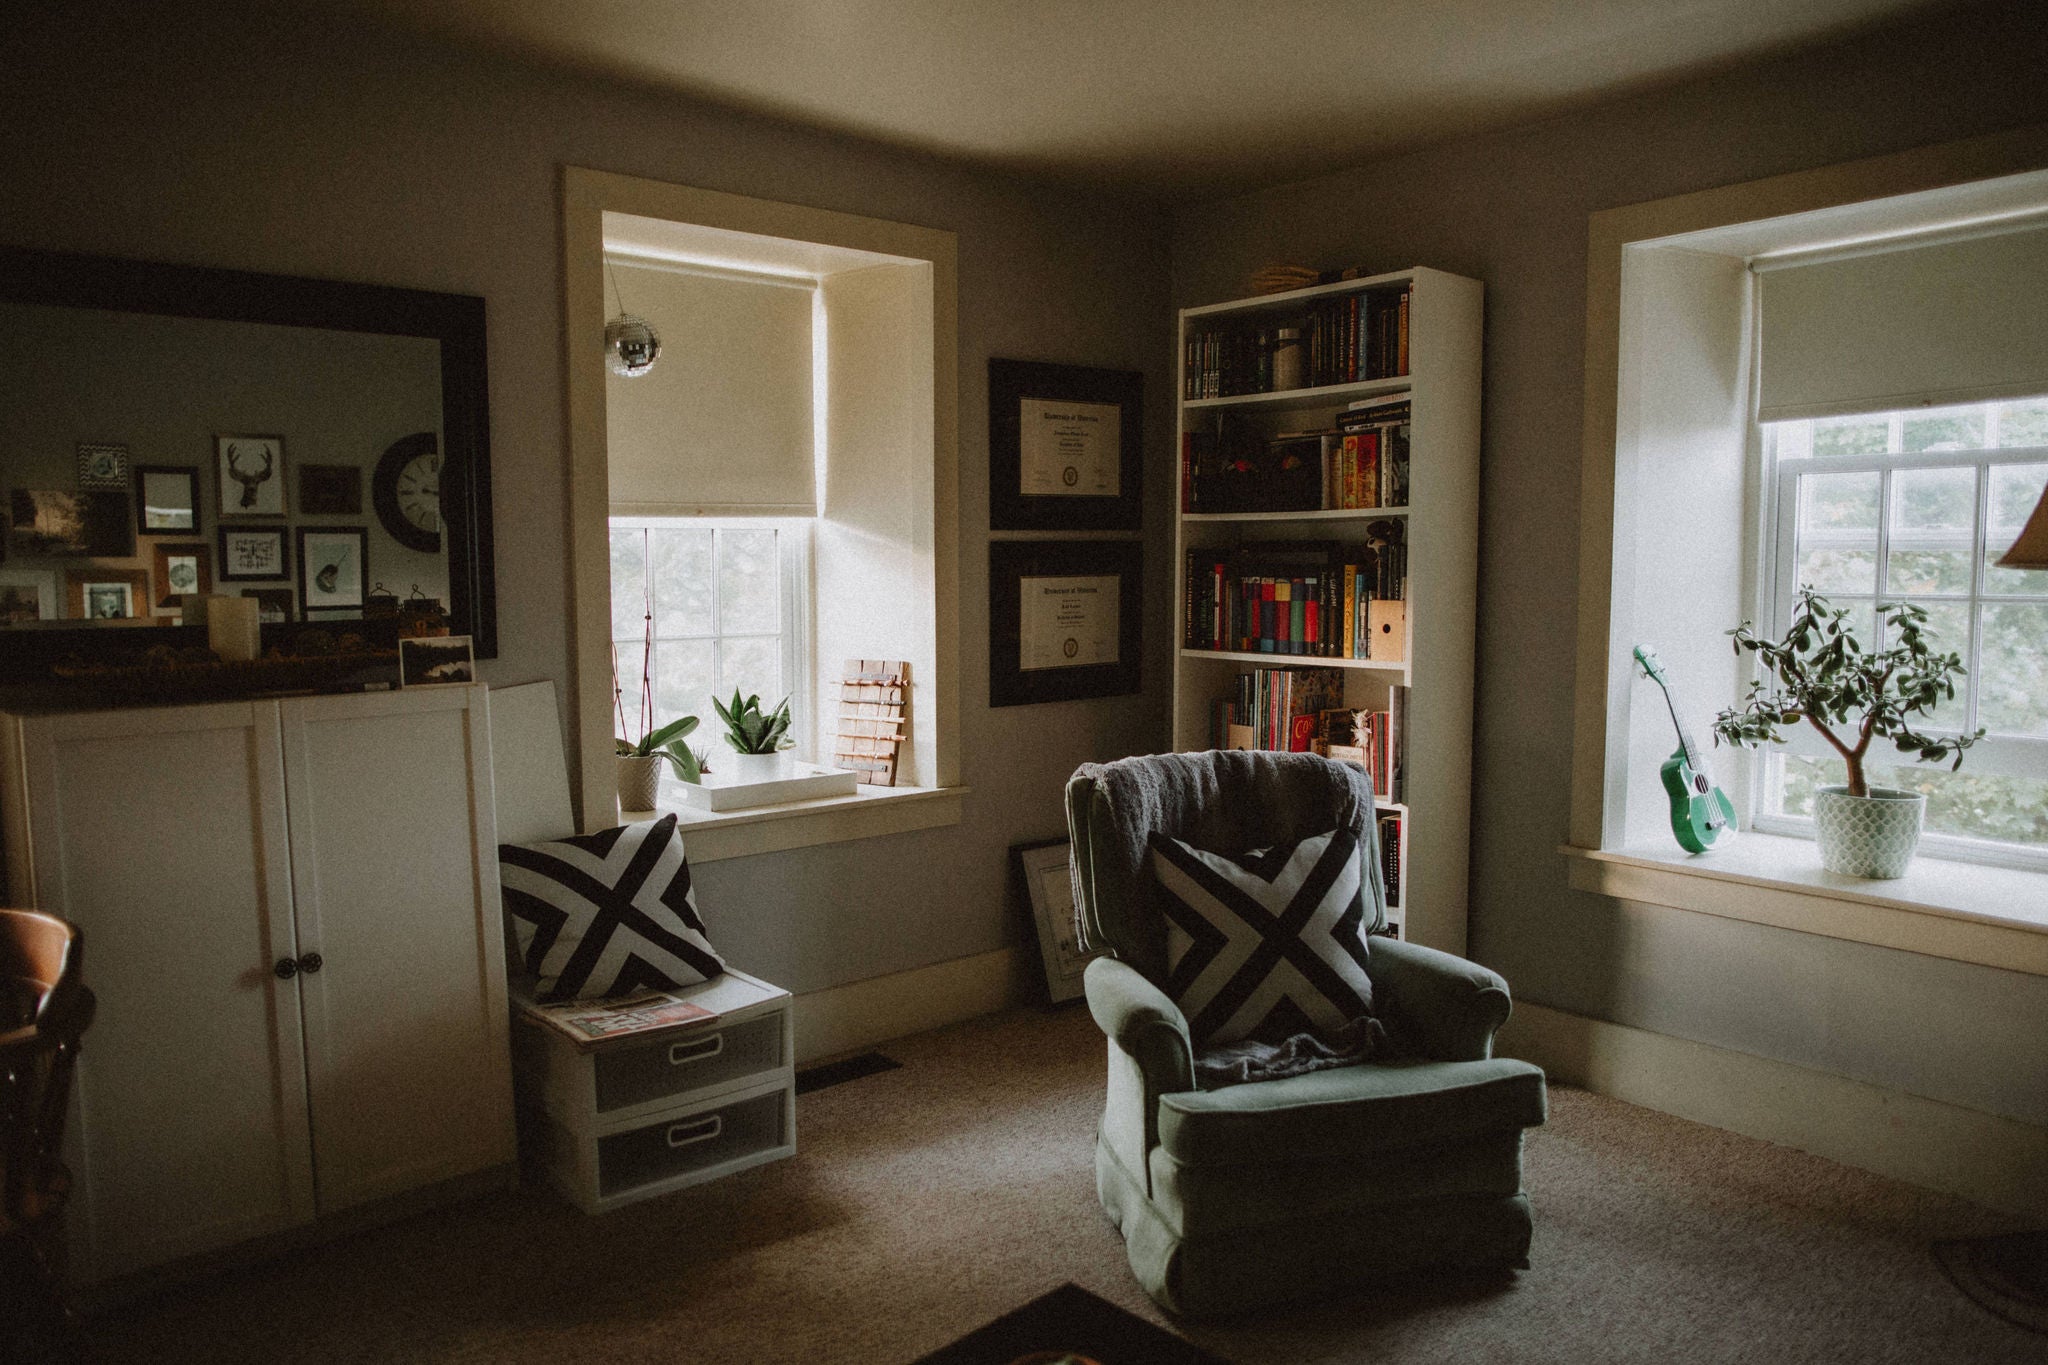 A corner of the brubacher house living room, with two reclining chairs and a book case.